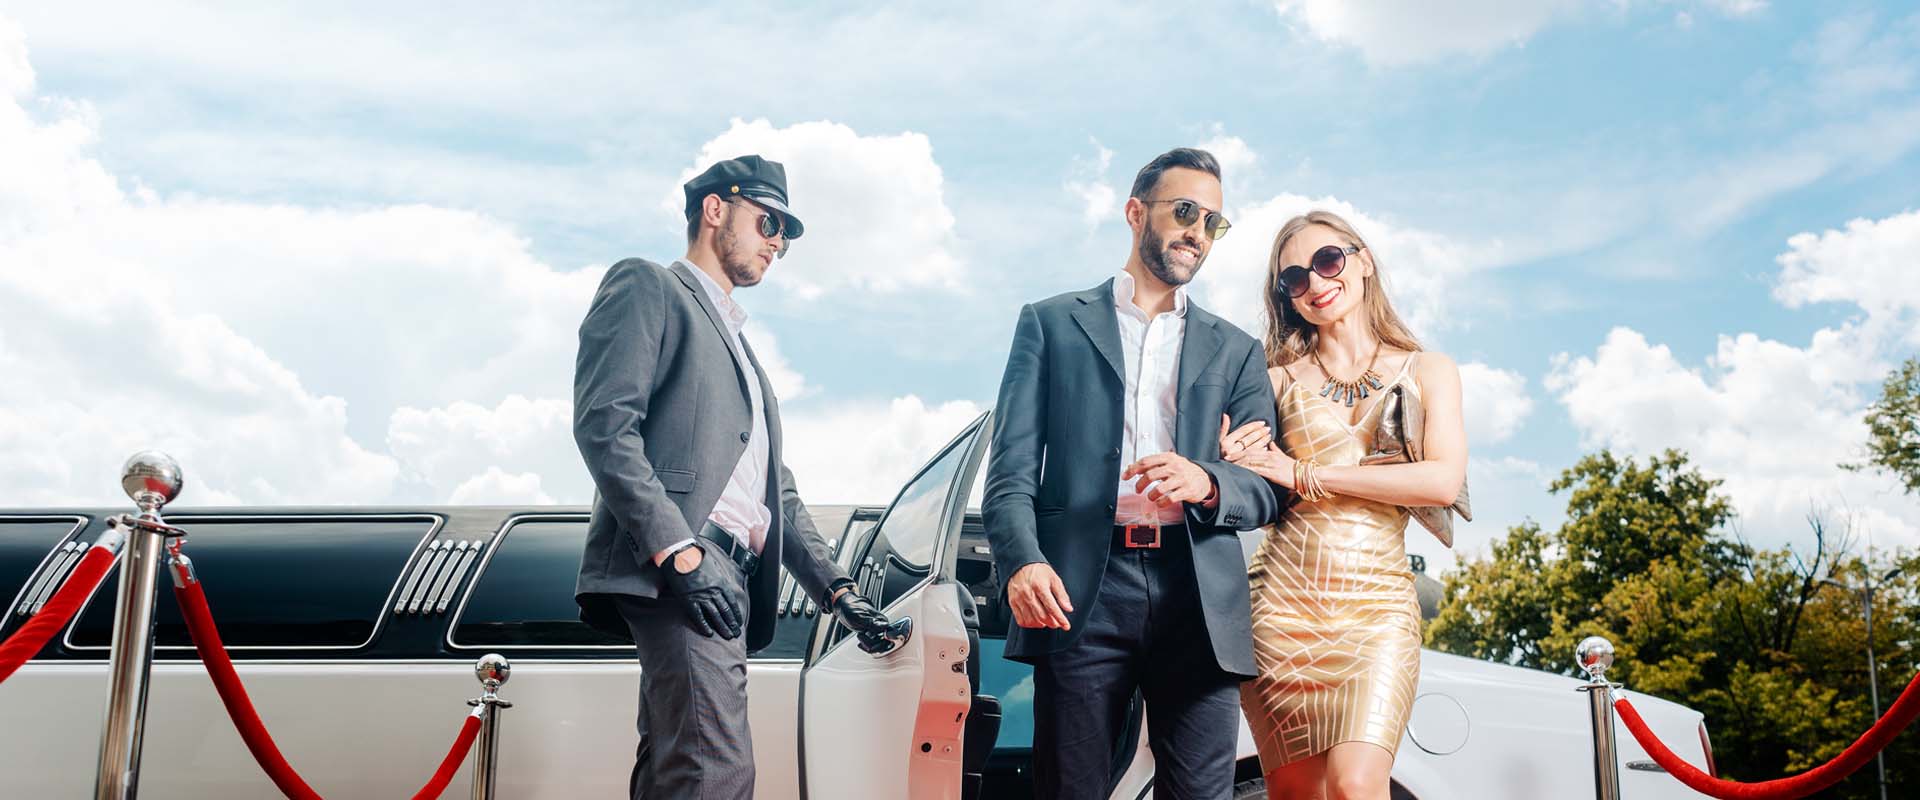 Limo Services For Every Occasion